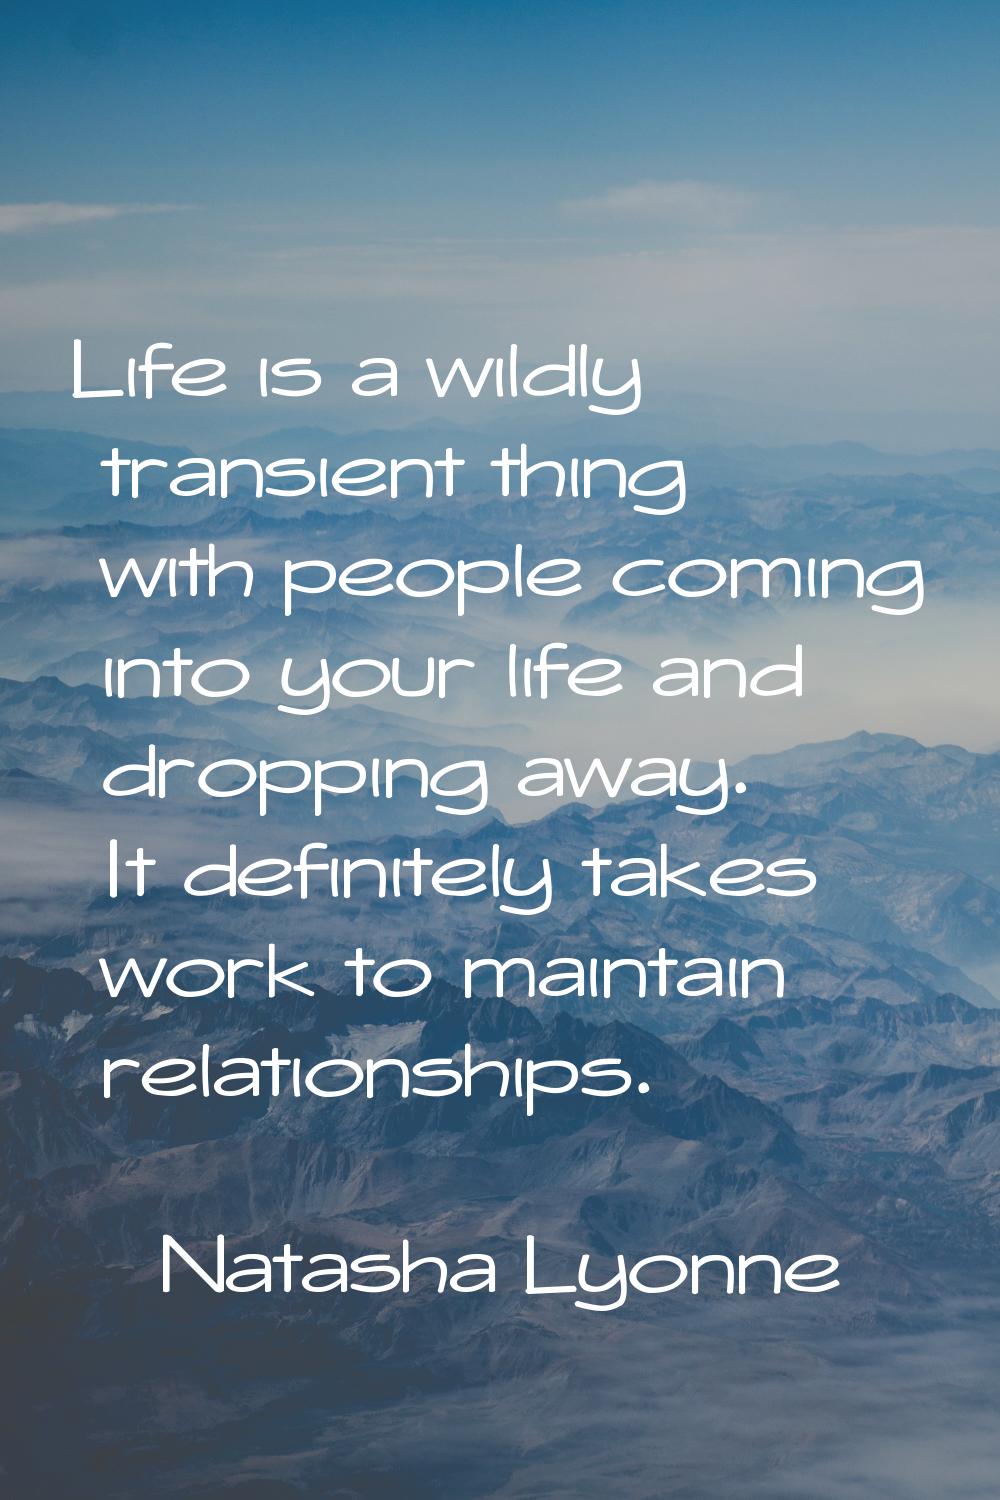 Life is a wildly transient thing with people coming into your life and dropping away. It definitely